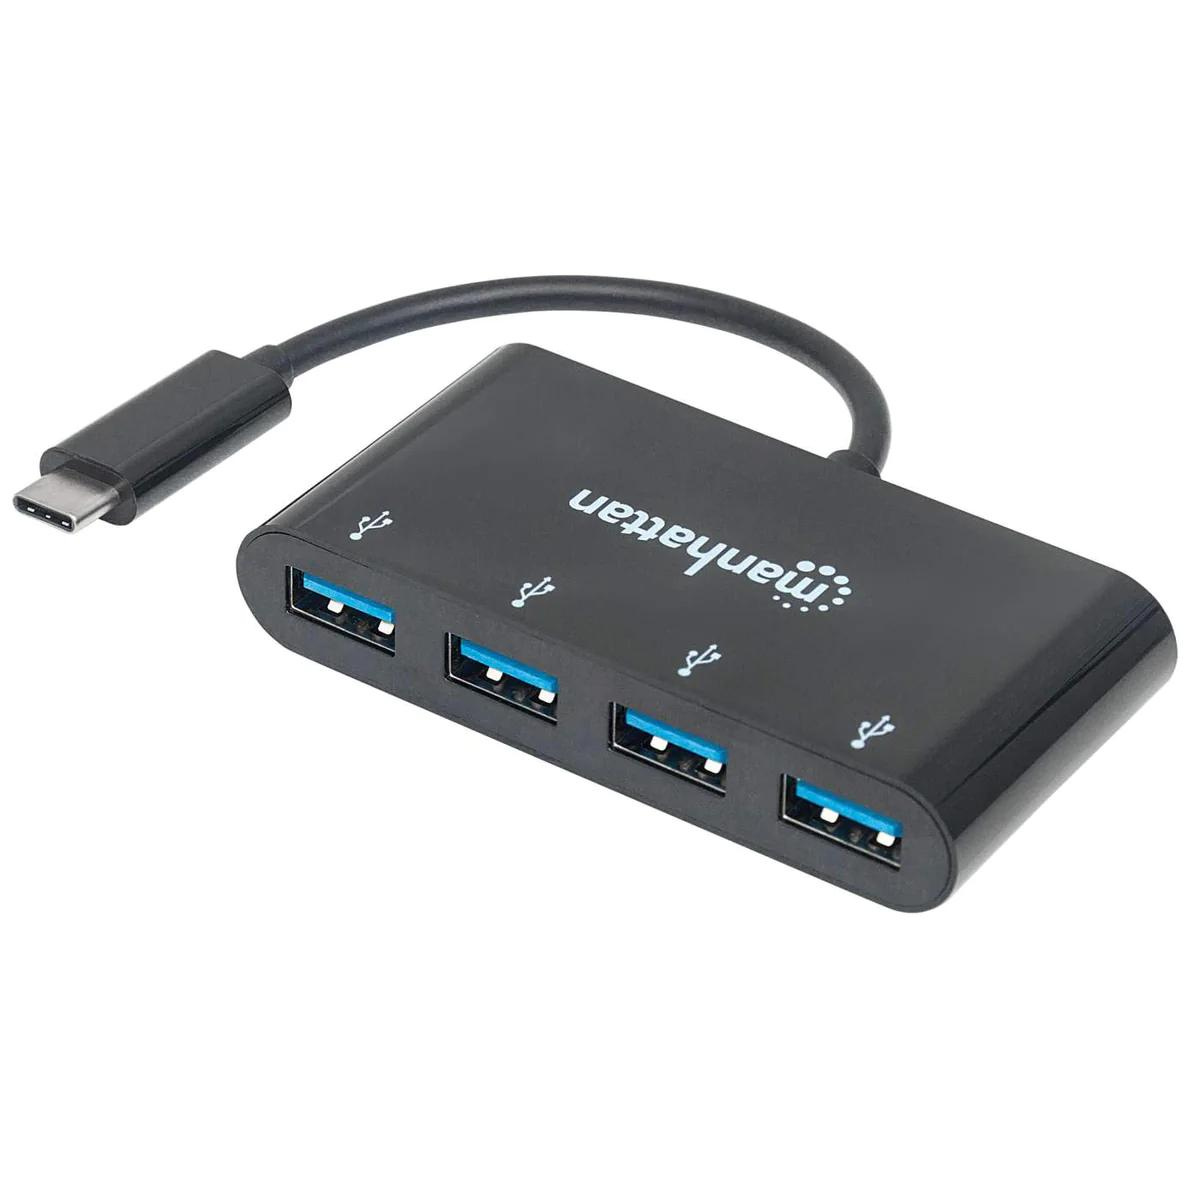 "High-Speed 4-Port USB 3.0 Type-C Hub: Add Multiple USB-A Ports for Faster Data Transfer"